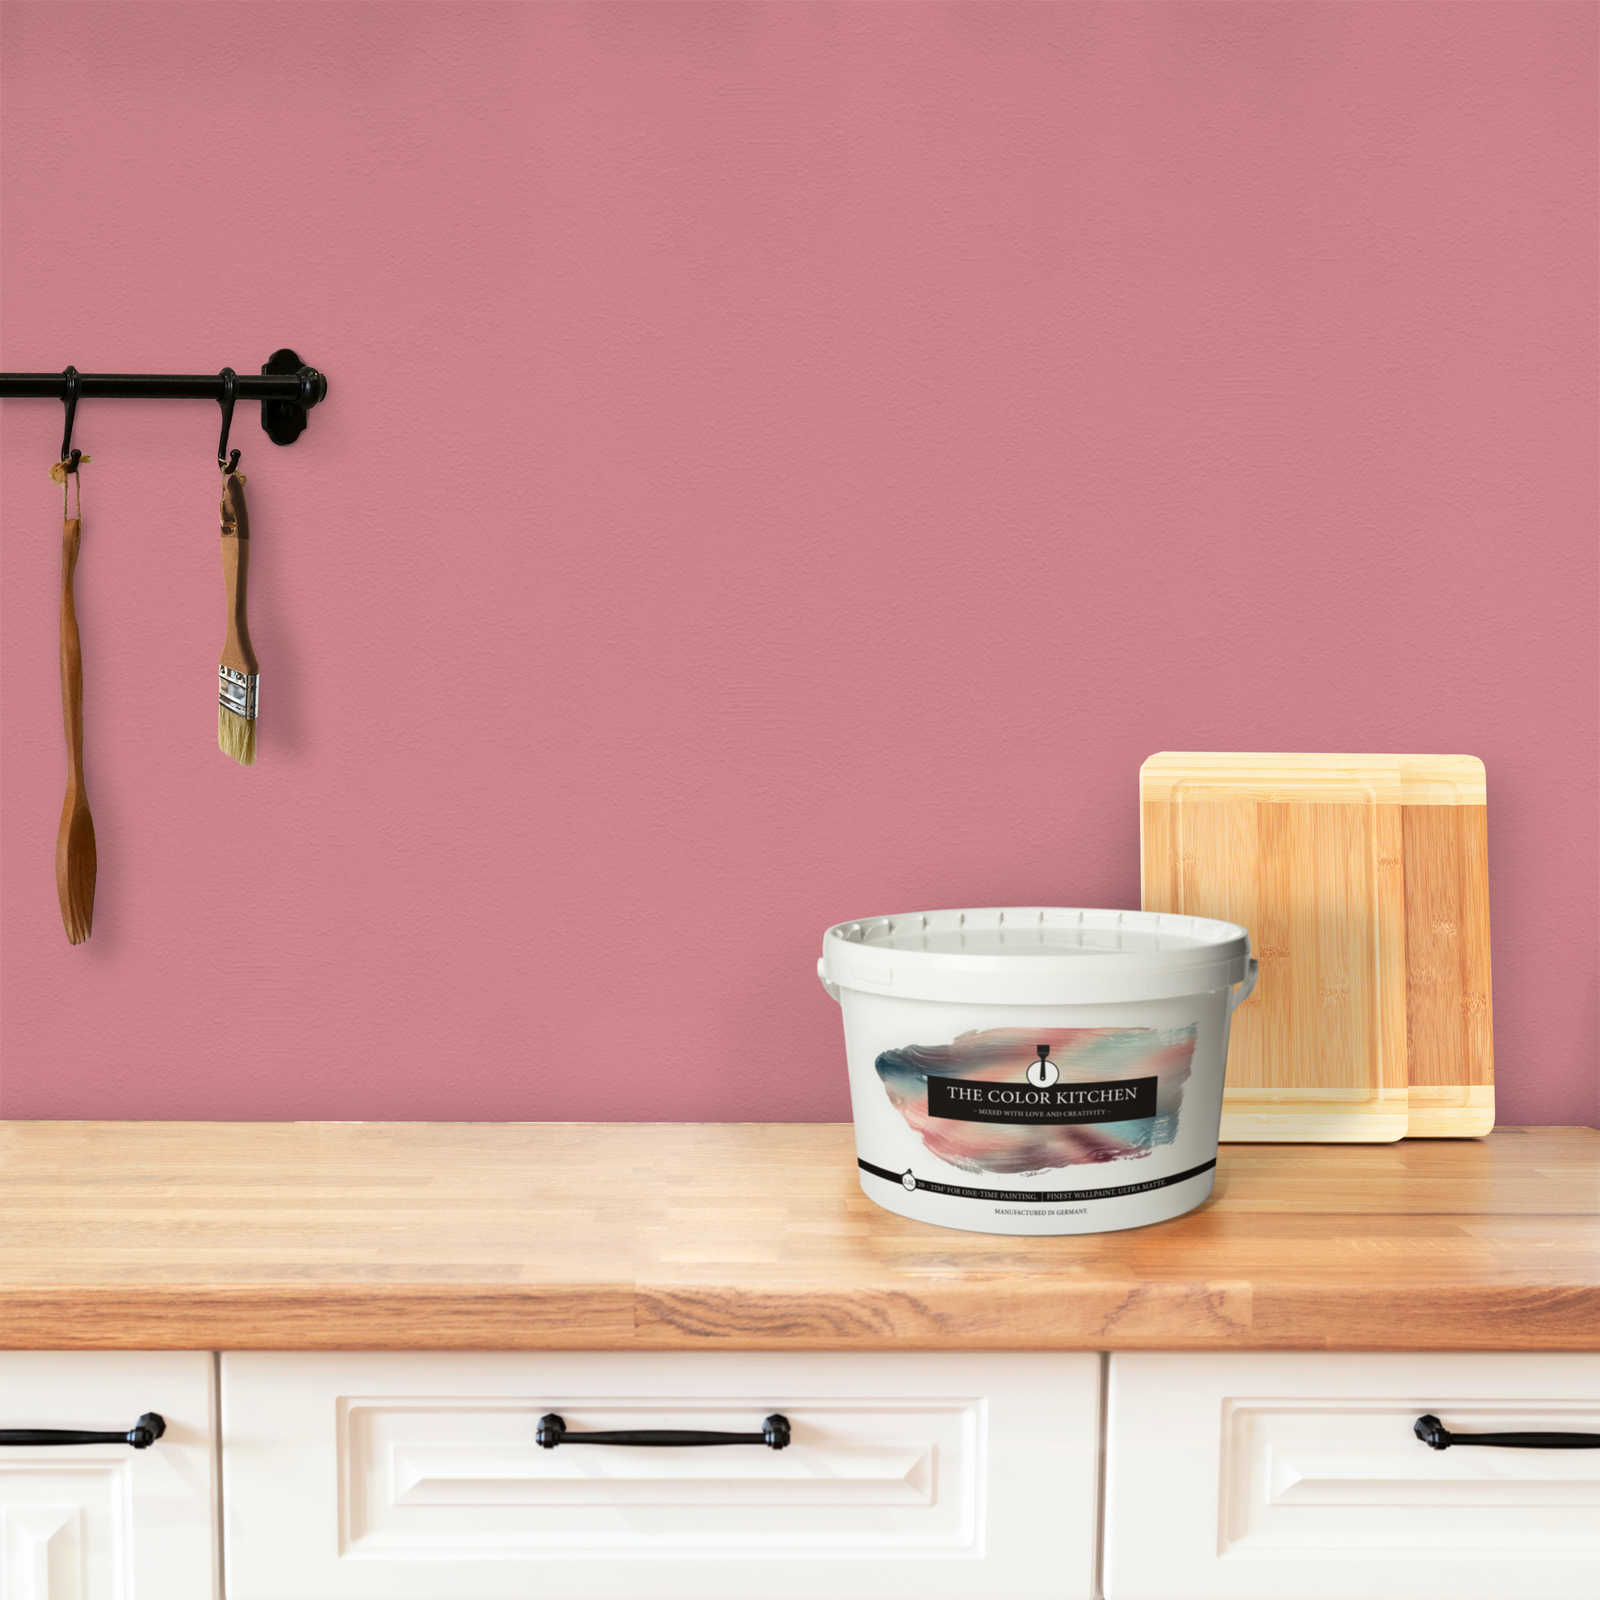             Wall Paint TCK7010 »Masterfully Macaron« in vivid pink – 2.5 litre
        